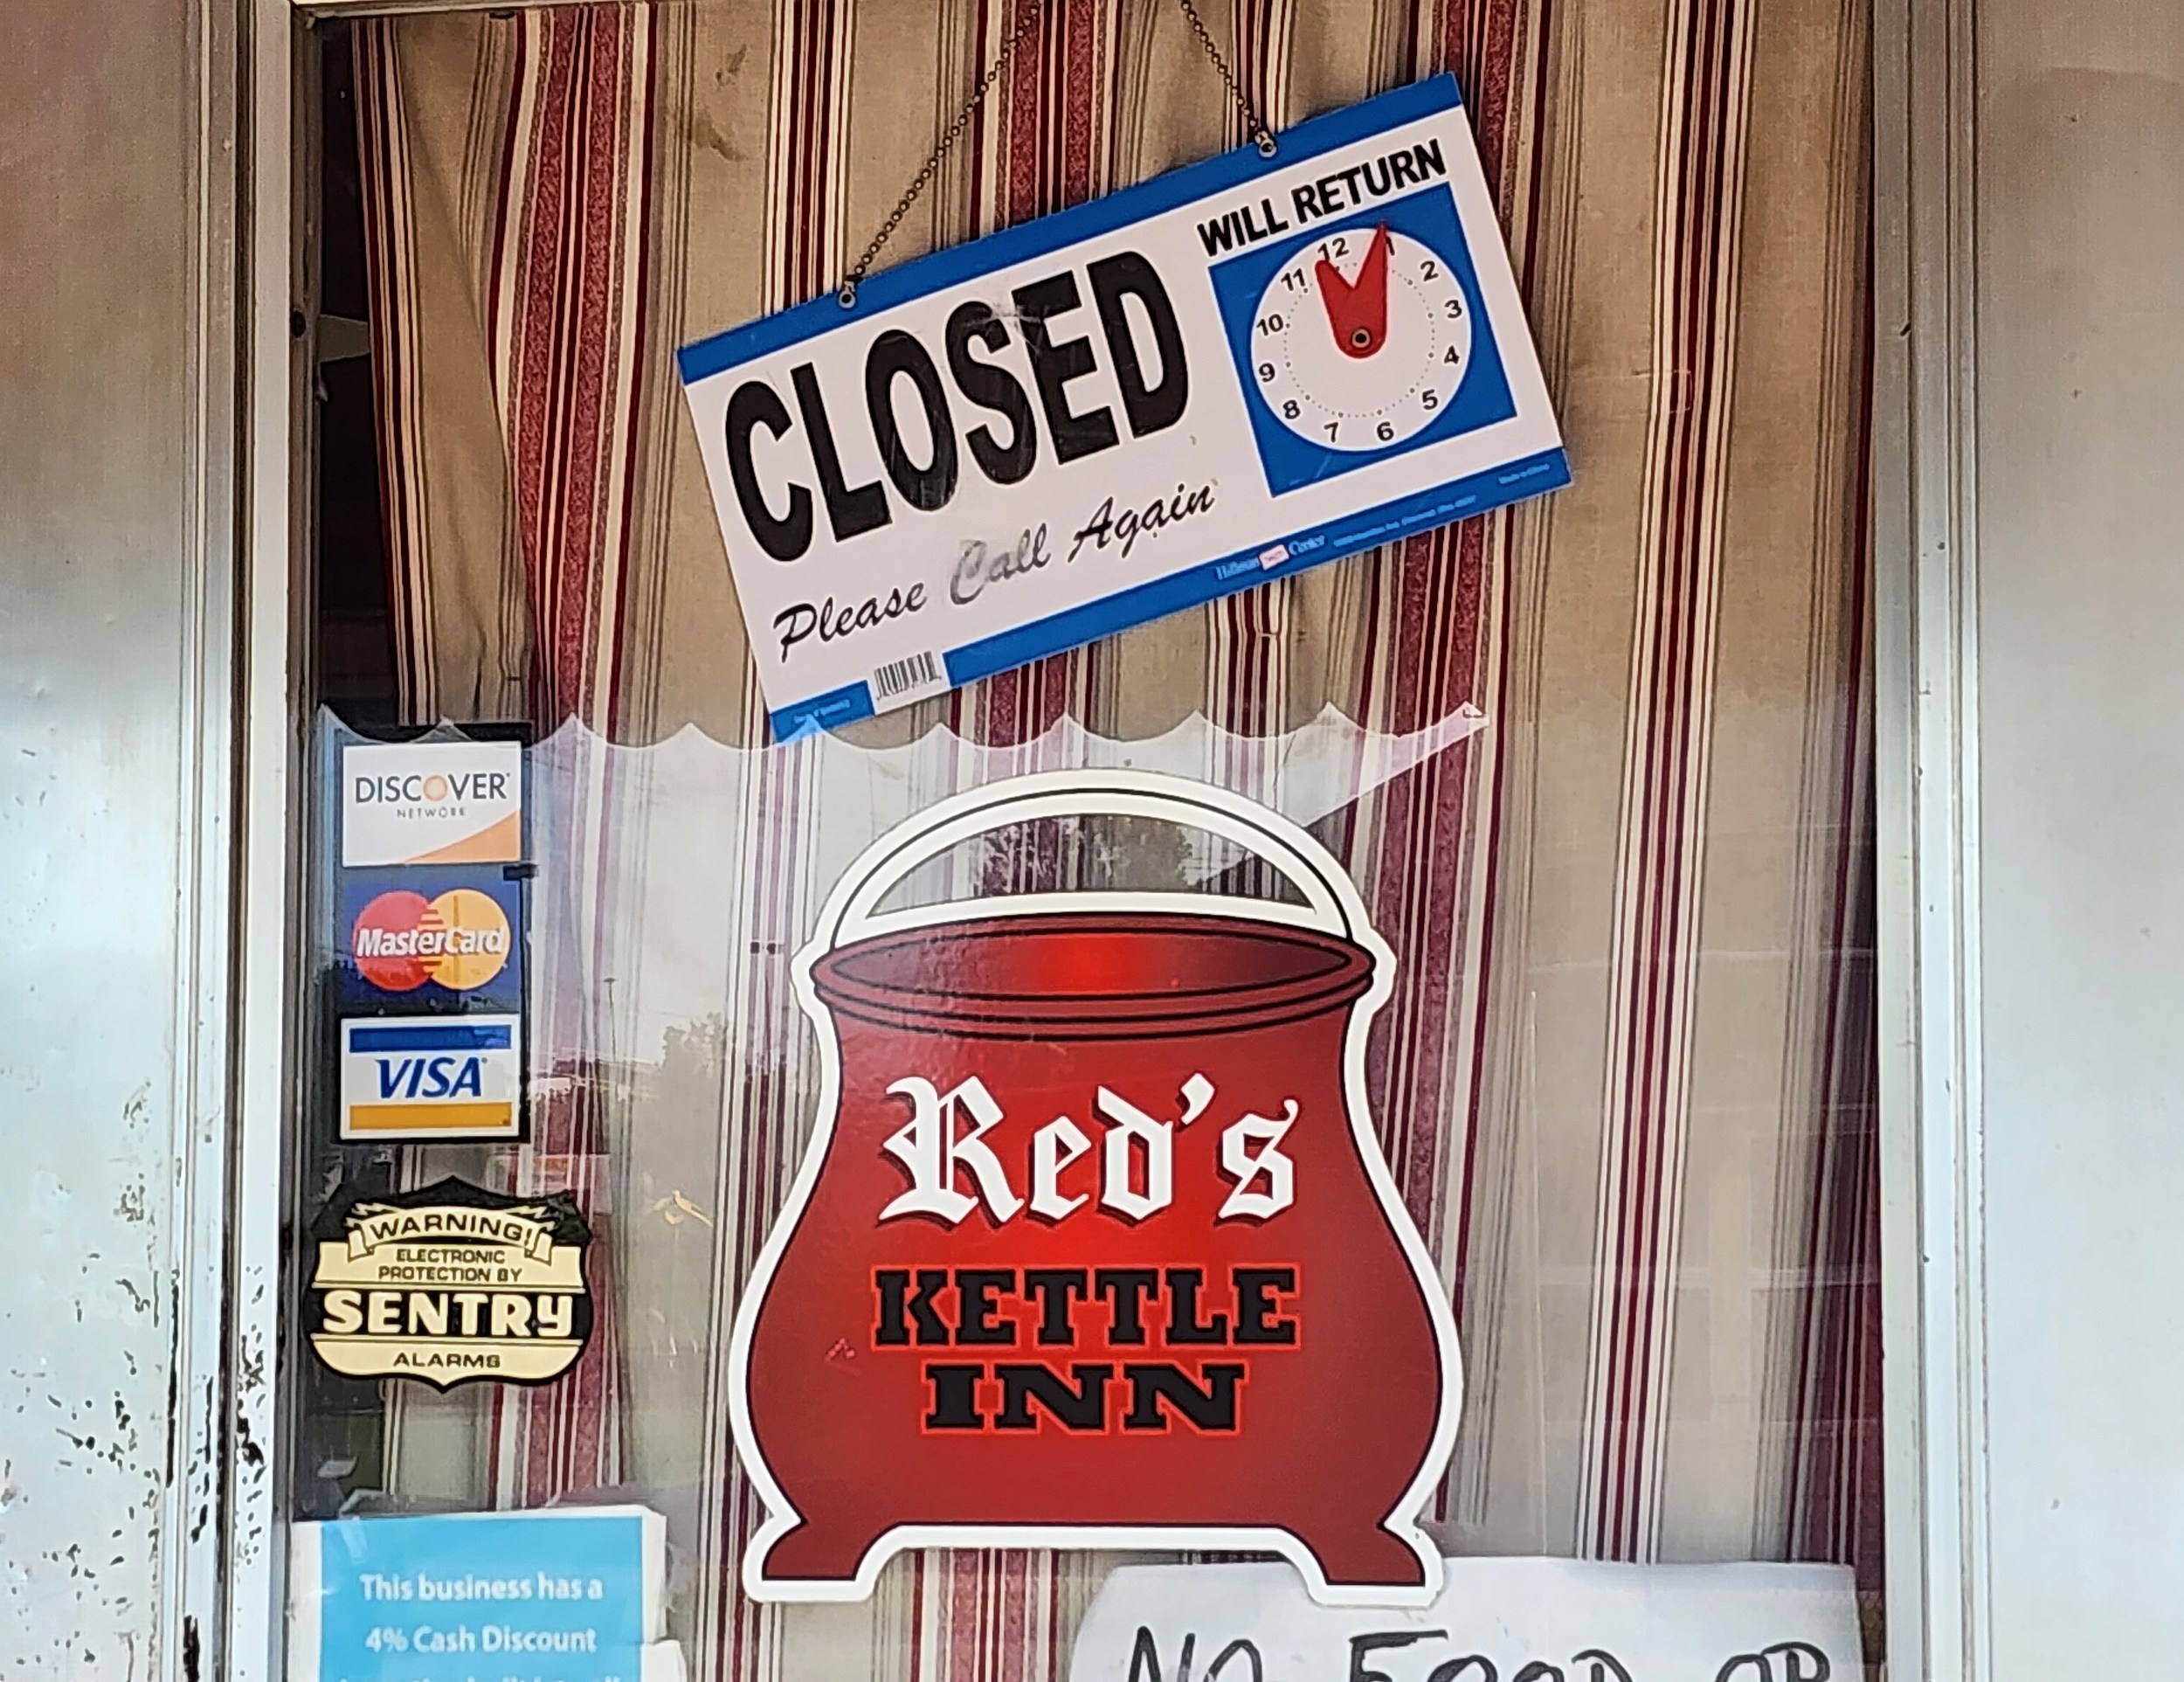 Reds Kettle Inn is Closed